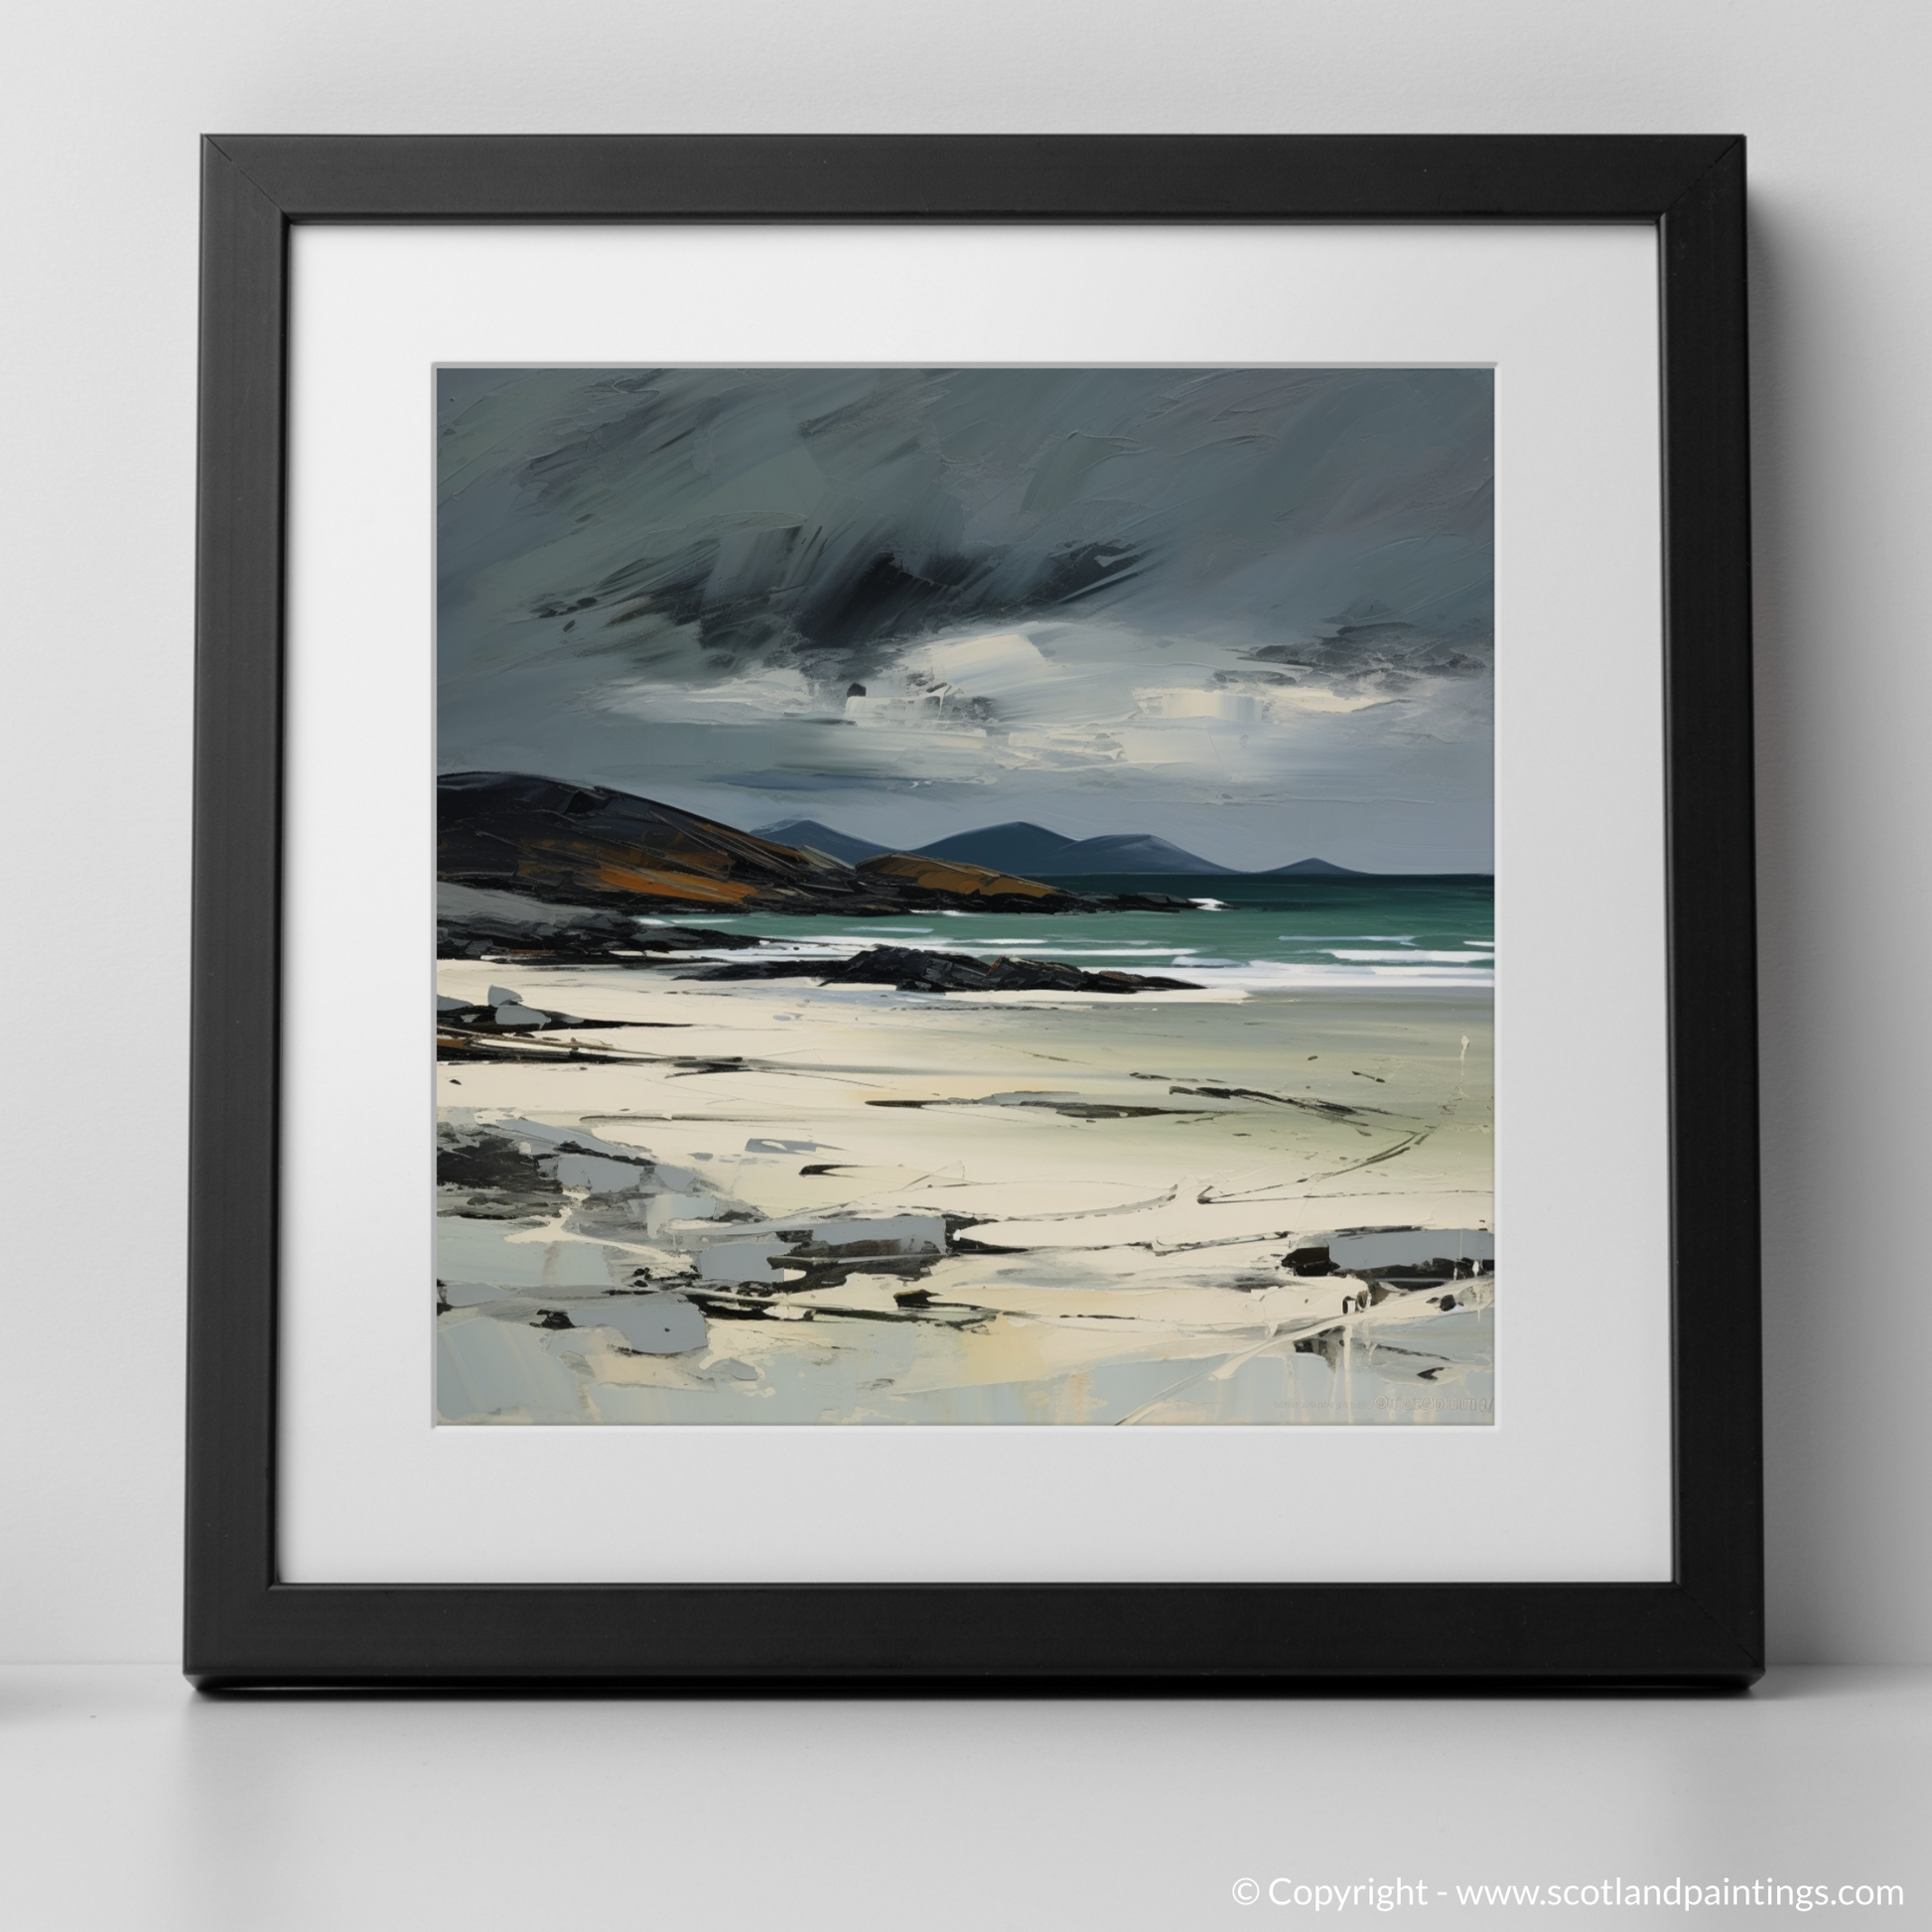 Art Print of Traigh Mhor, Isle of Barra with a black frame